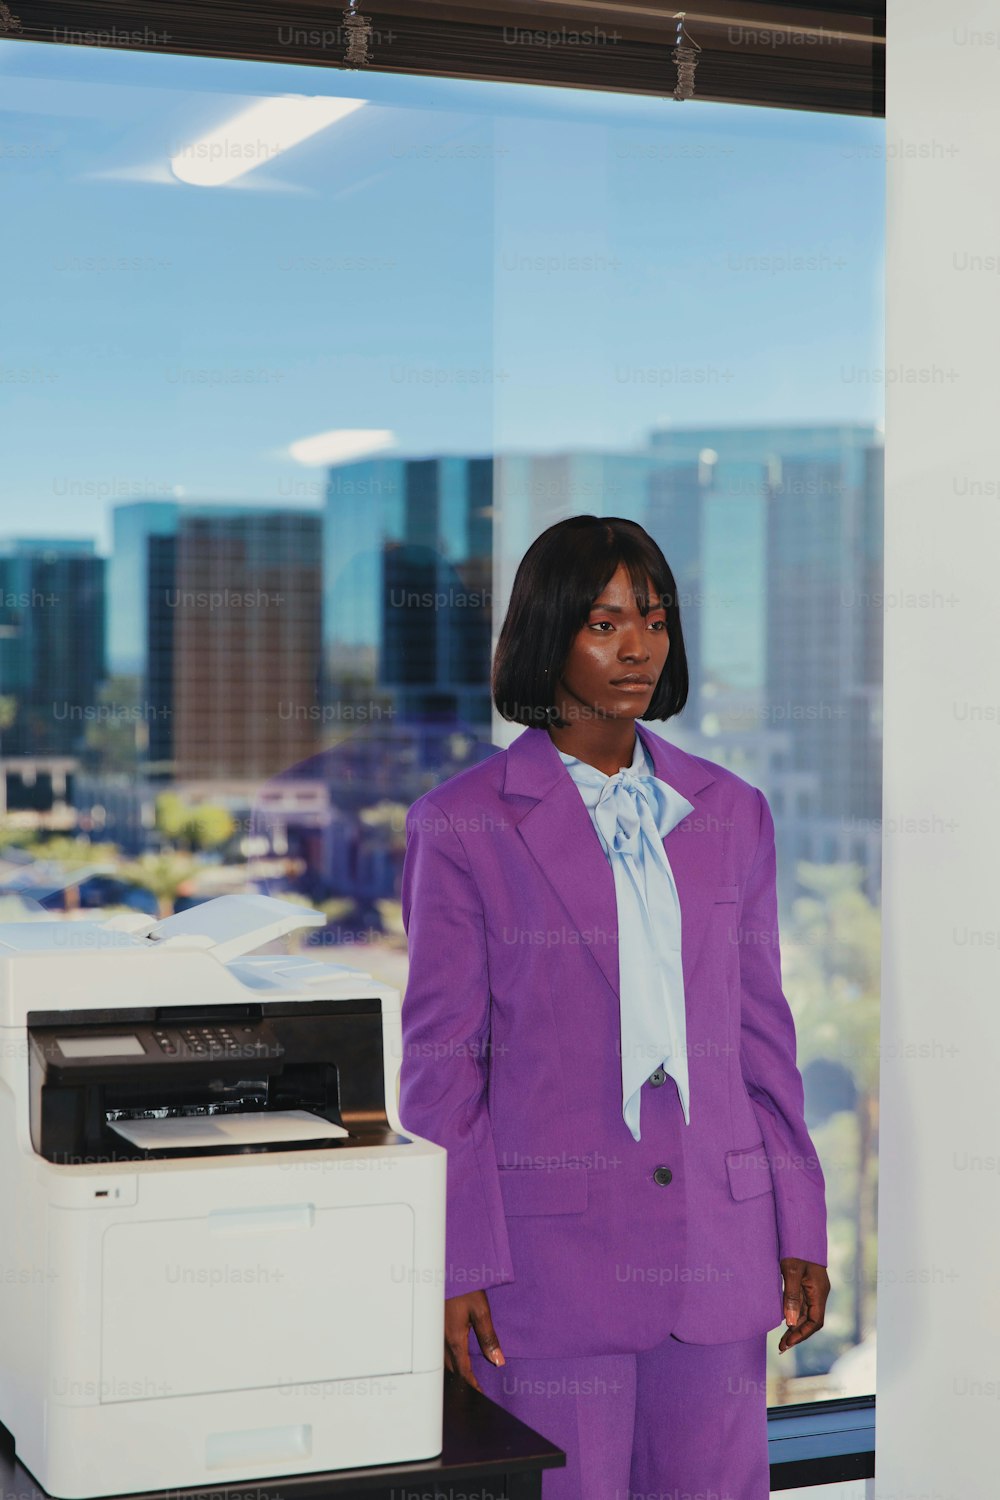 a woman in a purple suit standing next to a printer